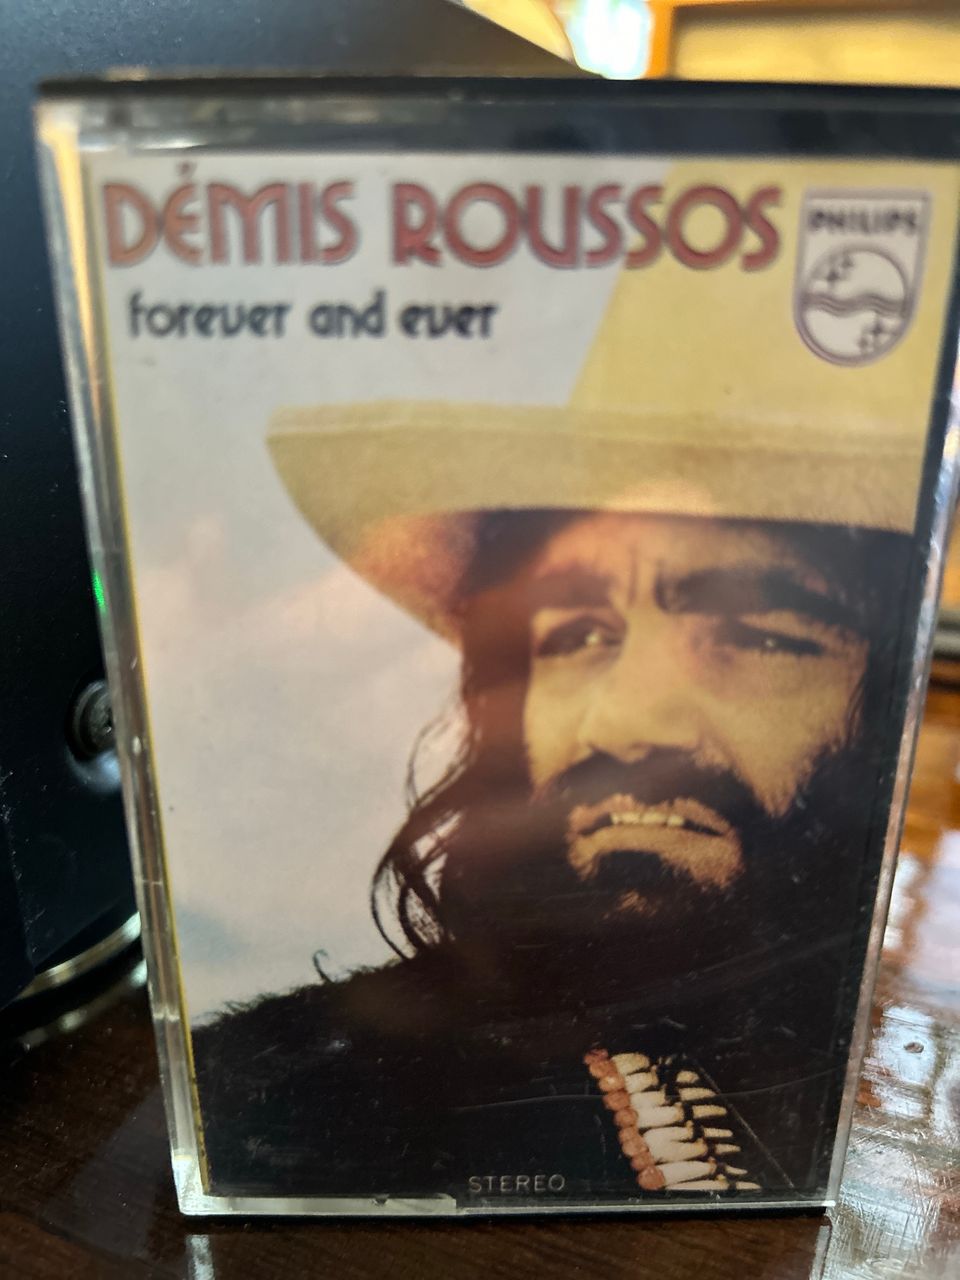 Demis Roussos - Forever and ever C-kasetti